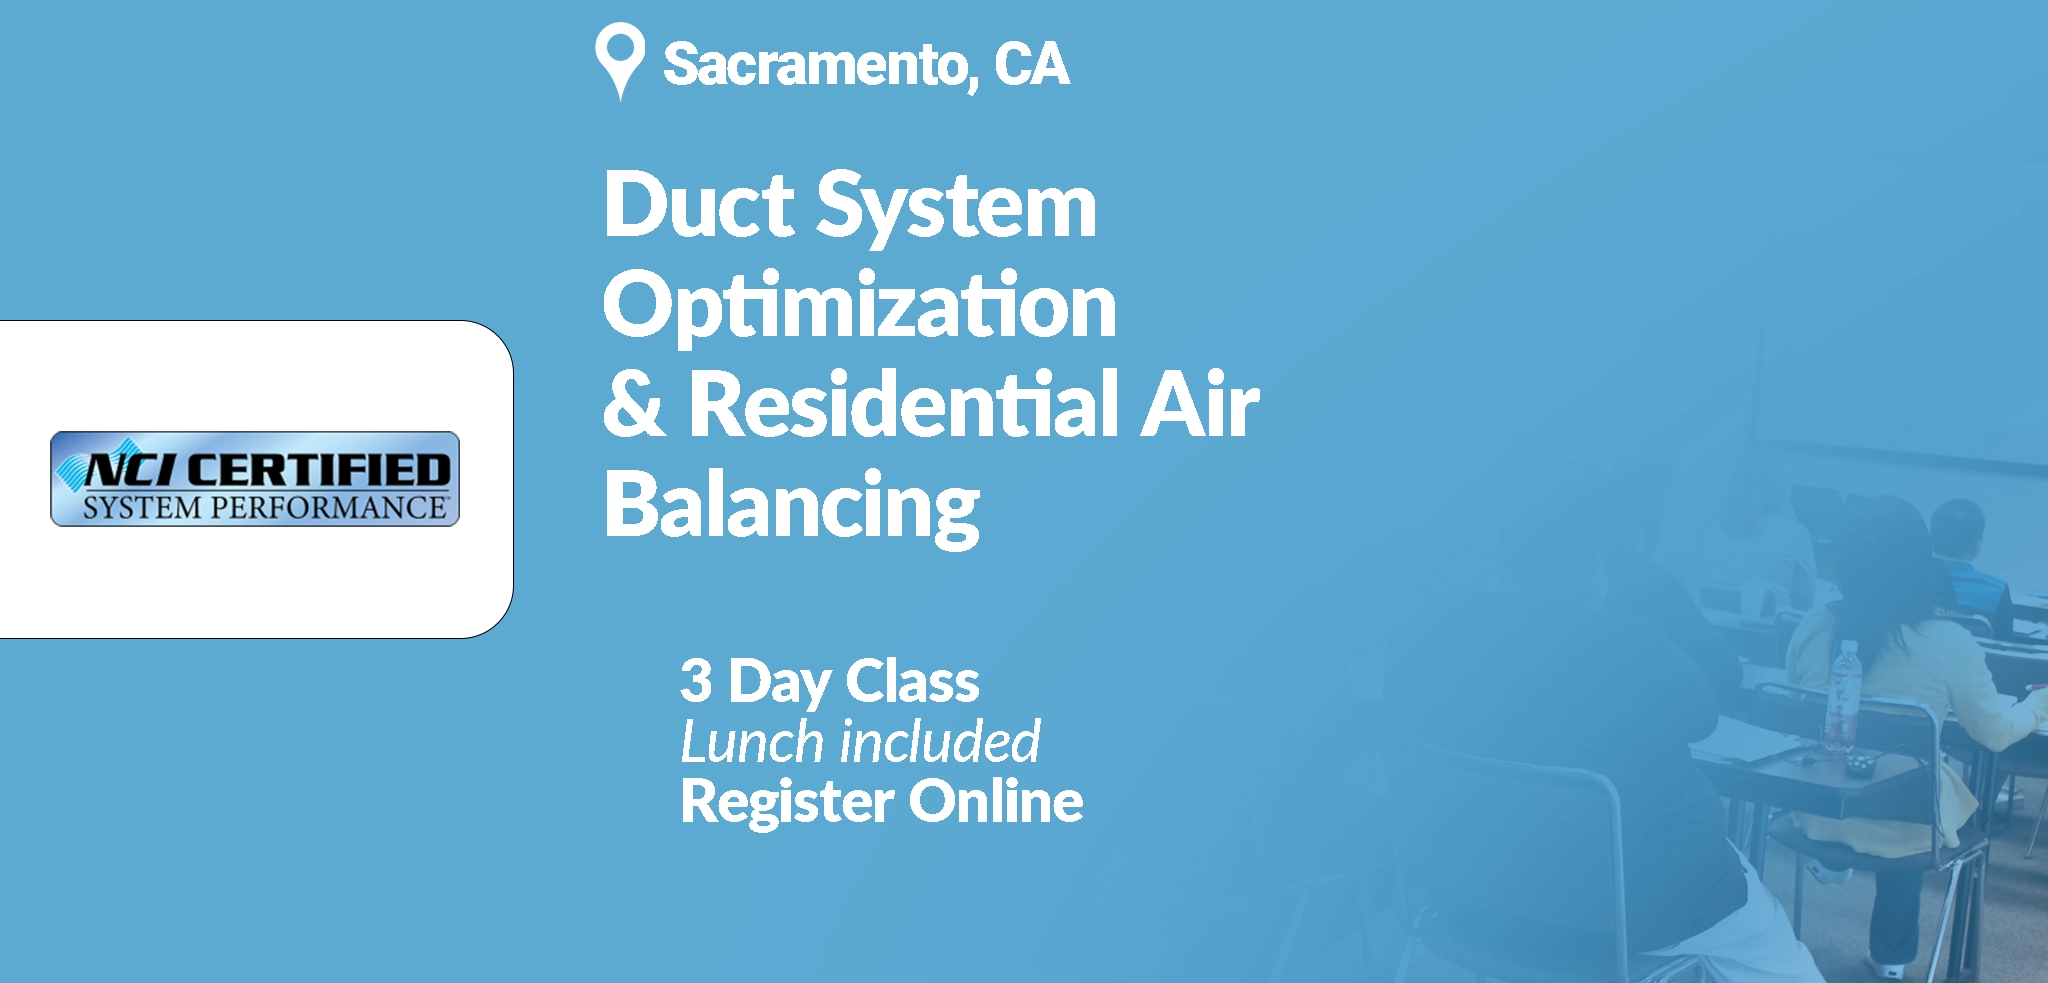 NCI Duct System Optimization and Residential Air Balancing